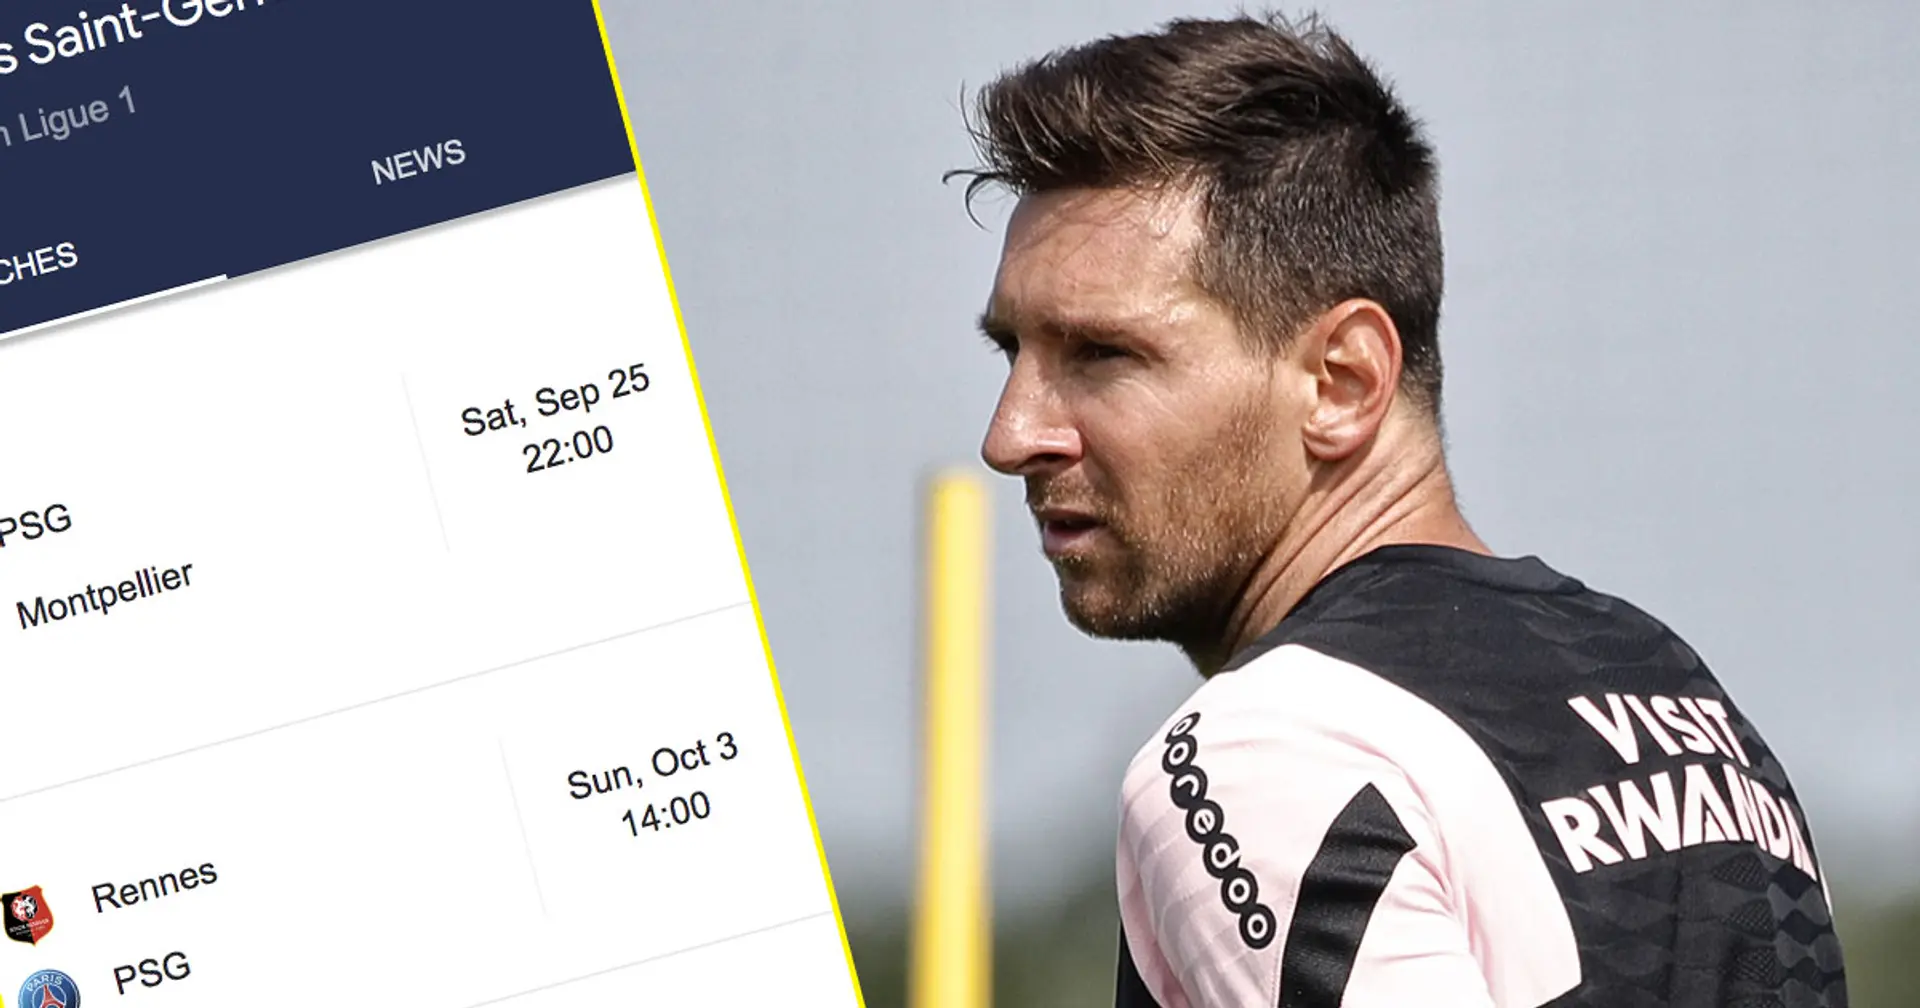 Will Messi be fit to play against Montpellier? You asked, we answered